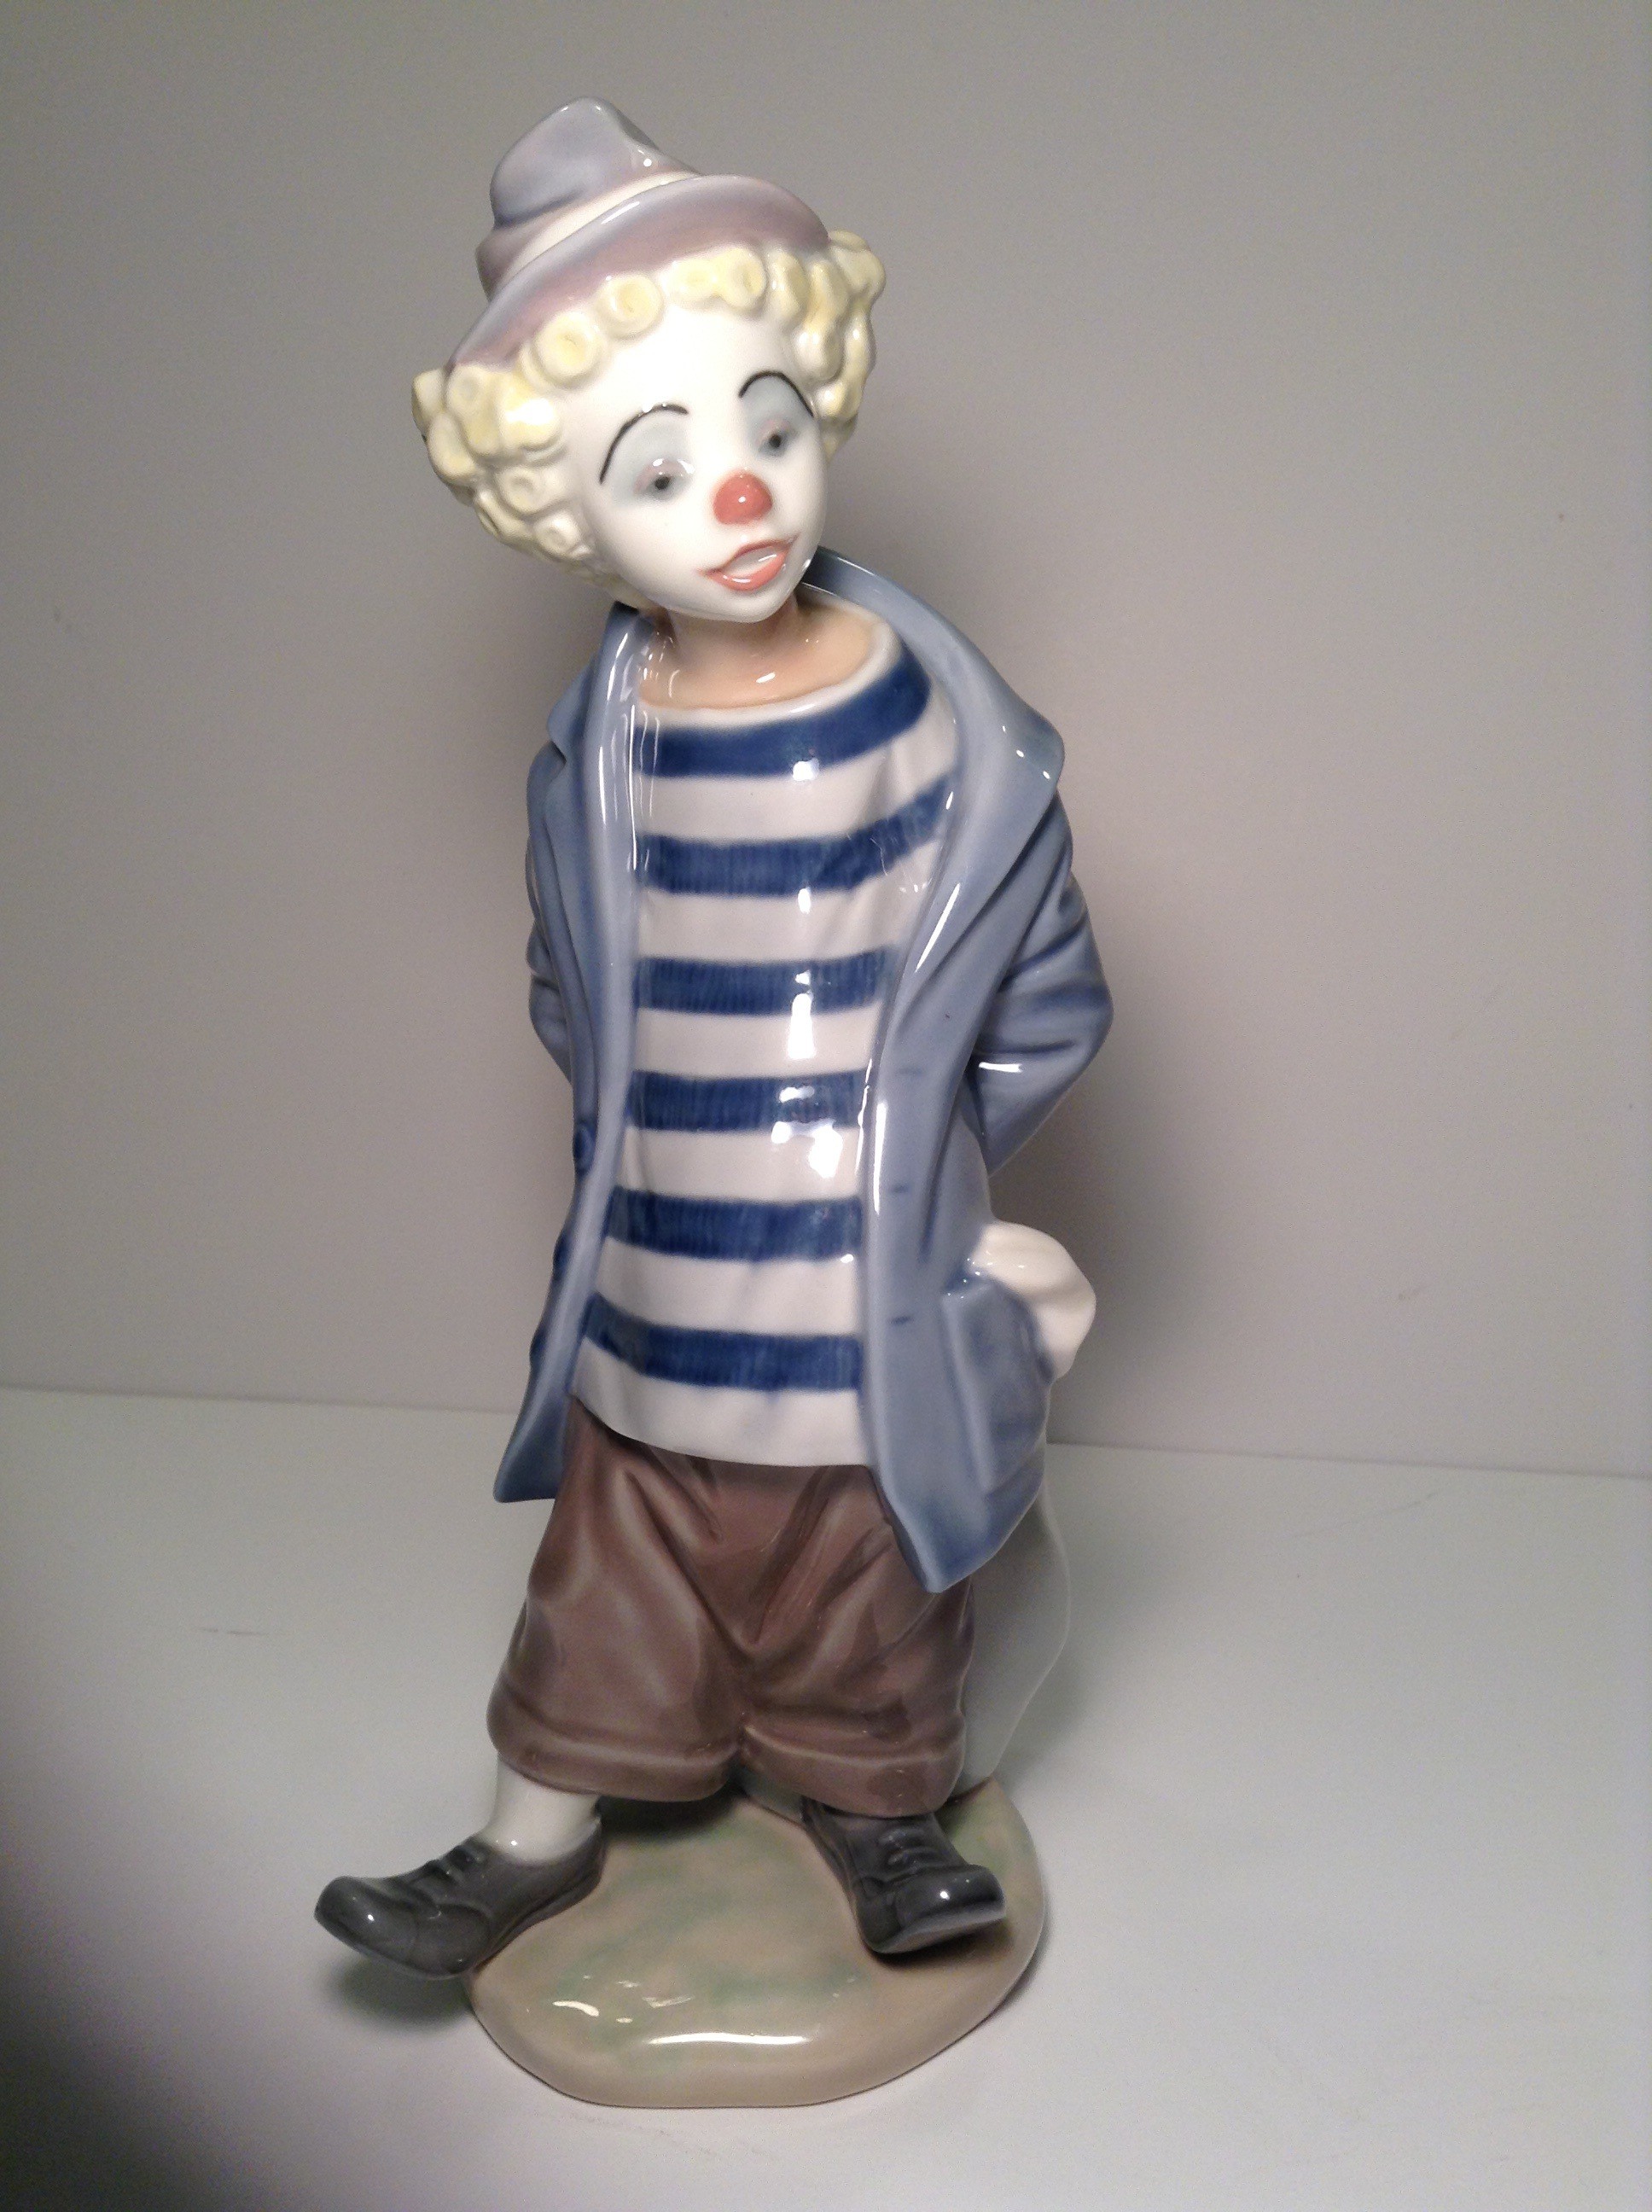 Retired Lladro Collectors Society 1986 Little Traveler Figurine #7602 with Box